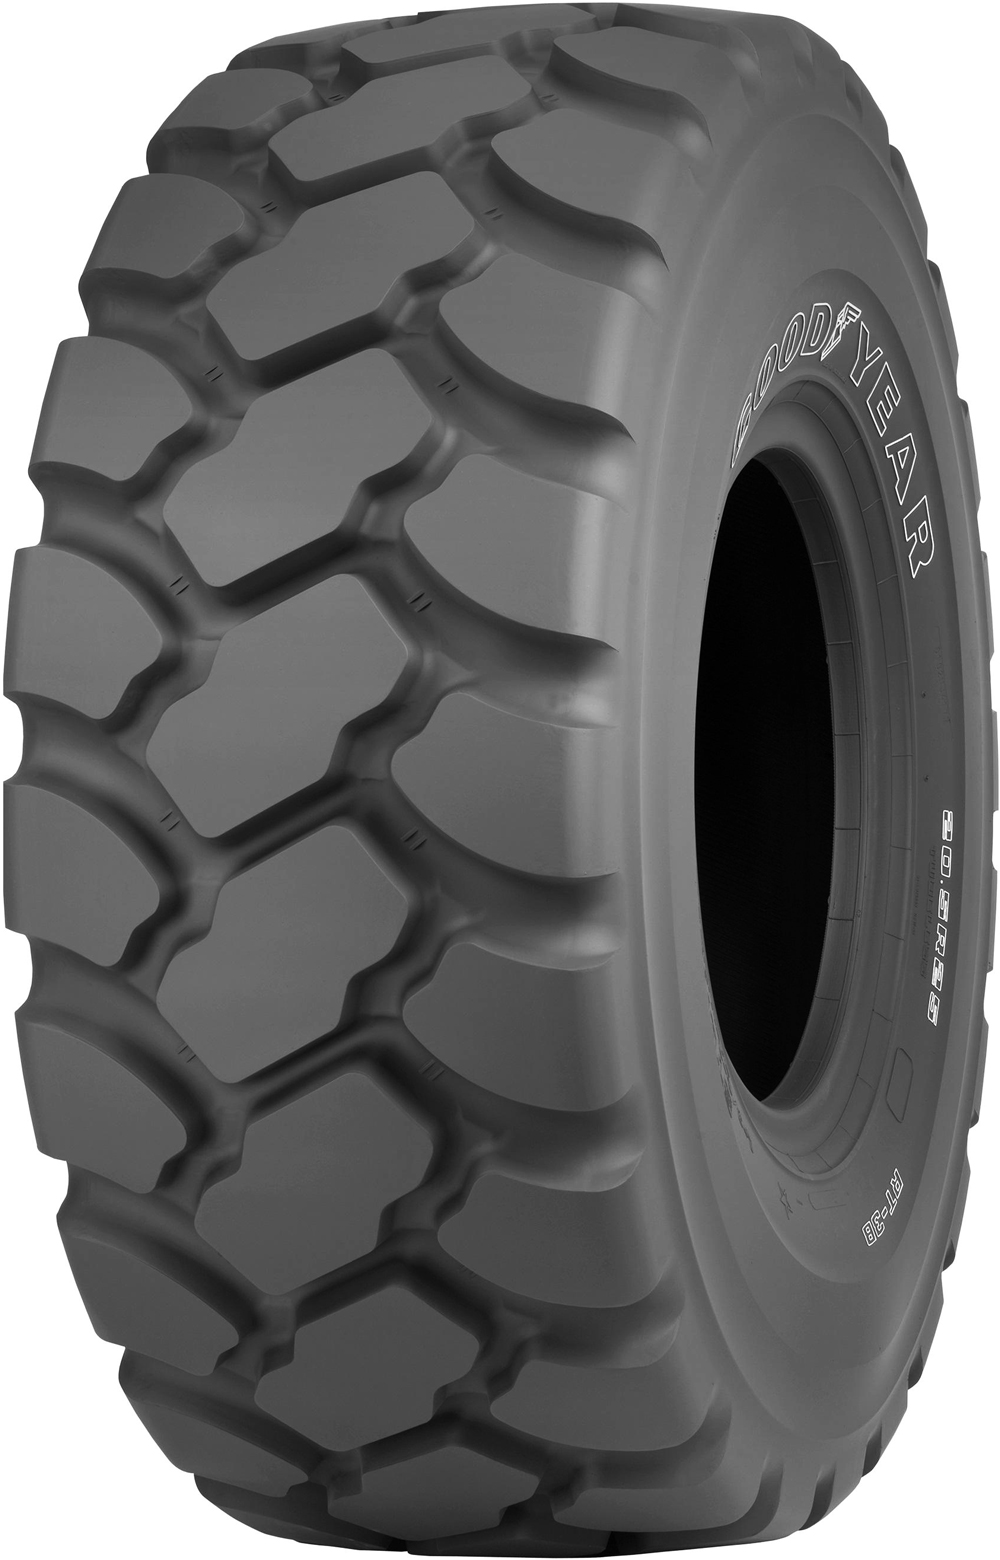 product_type-industrial_tires GOODYEAR RT-3B TL 29.5 R25 216A2